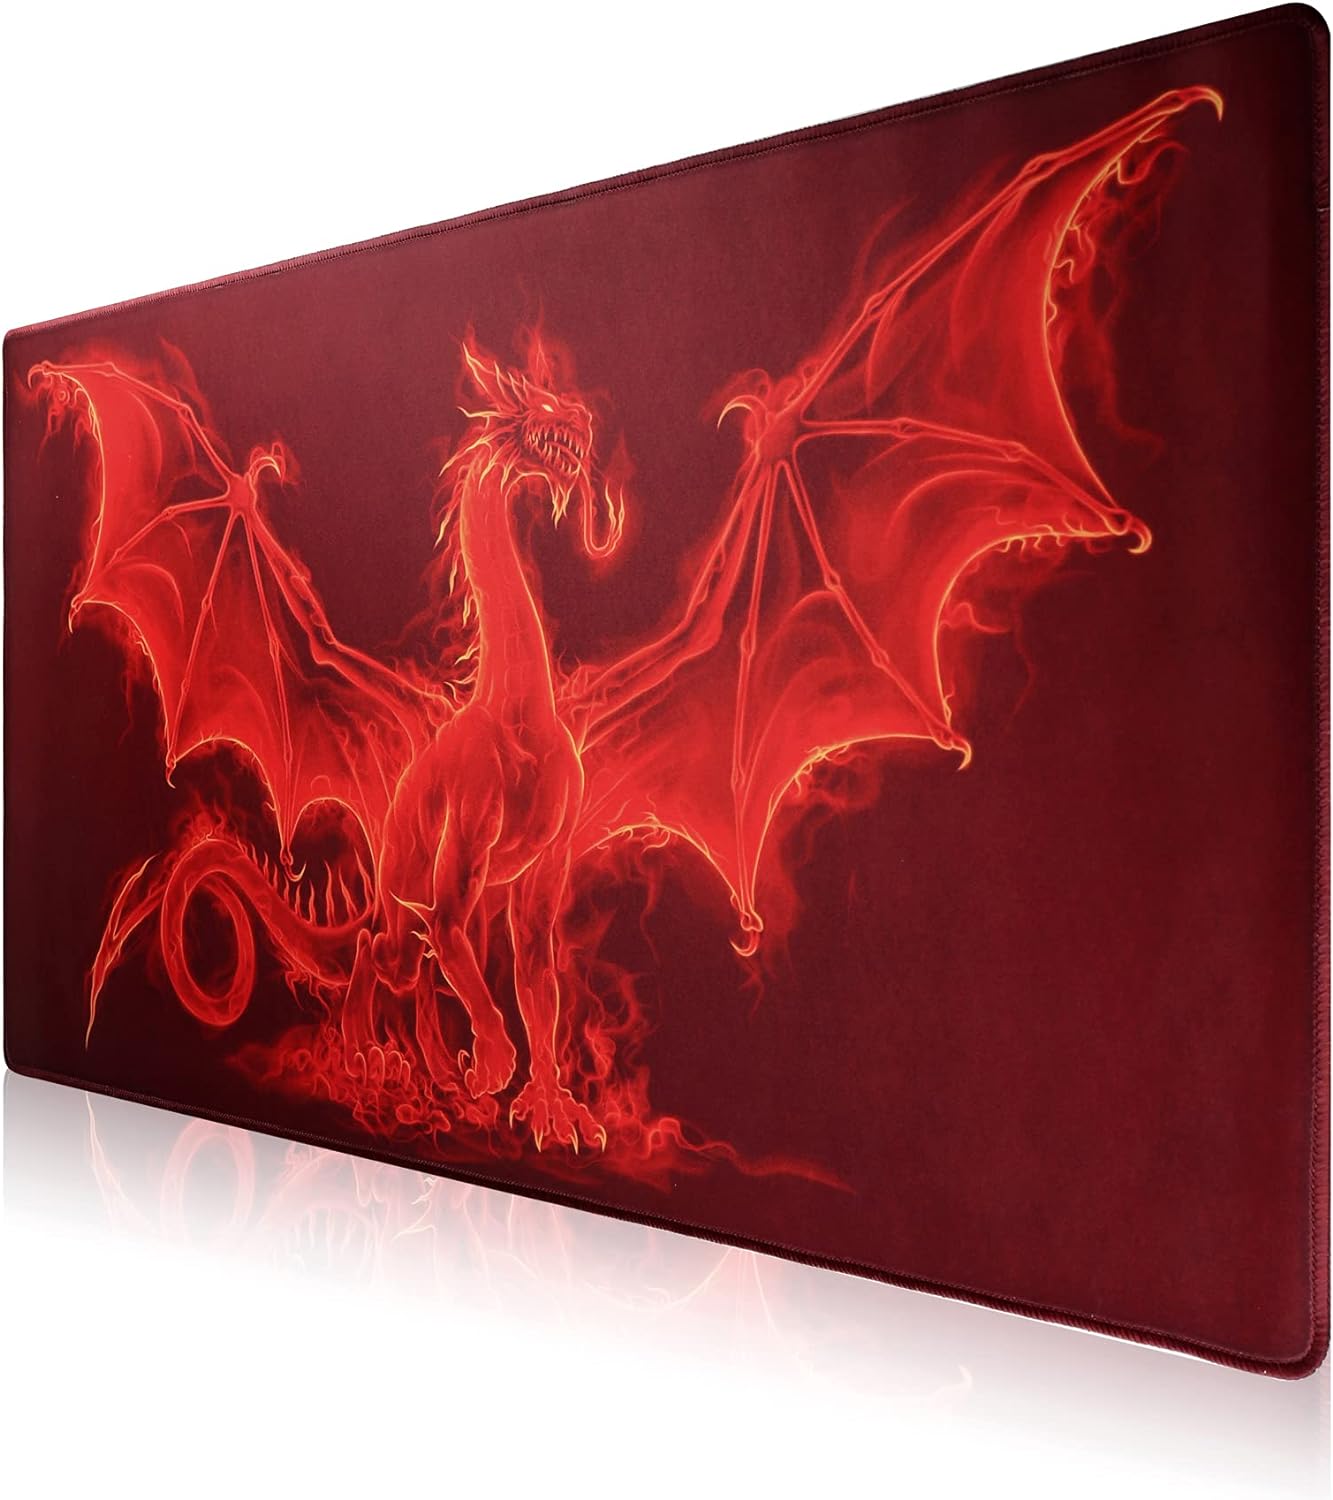 Jahosin Large Gaming Mouse Pad with Stitched Edges,[27.5x11.8In] Extended Mouse Pad with Non-Slip Natural Rubber Base for Gamer/Desktop/Office/Home (70x30 Red dragonus)